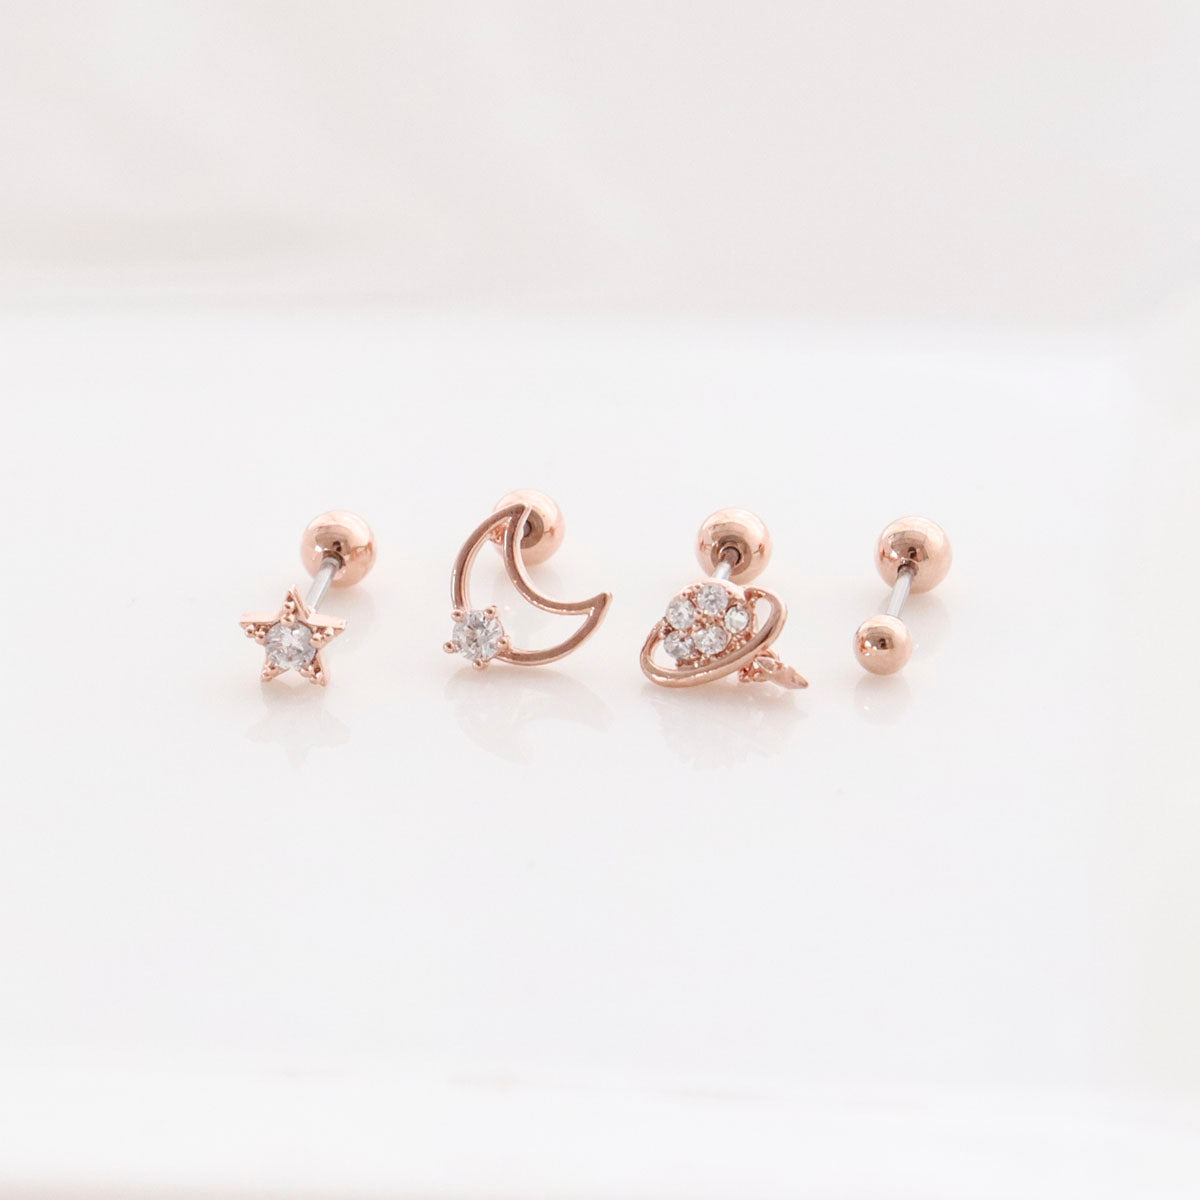 set of 4 crescent moon, cubic tiny star and planet and ball Surgical Steel screw back ball Cartilage earrings, Barbells Cartilage Piercing